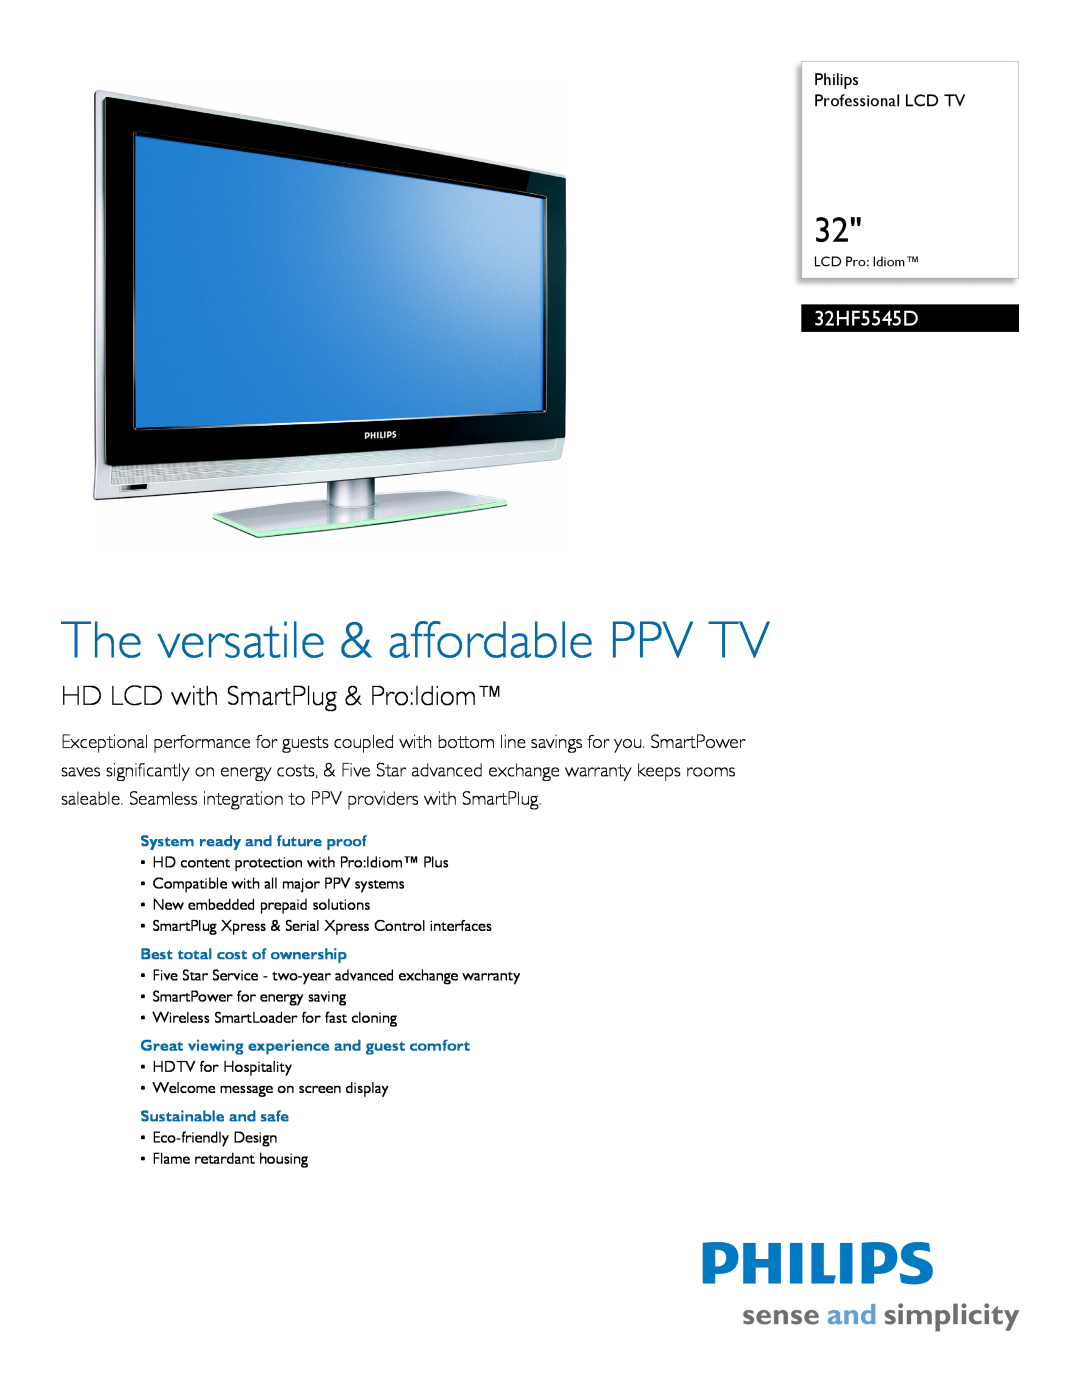 Philips 32HF5545D warranty The versatile & affordable PPV TV, HD LCD with SmartPlug & ProIdiom 